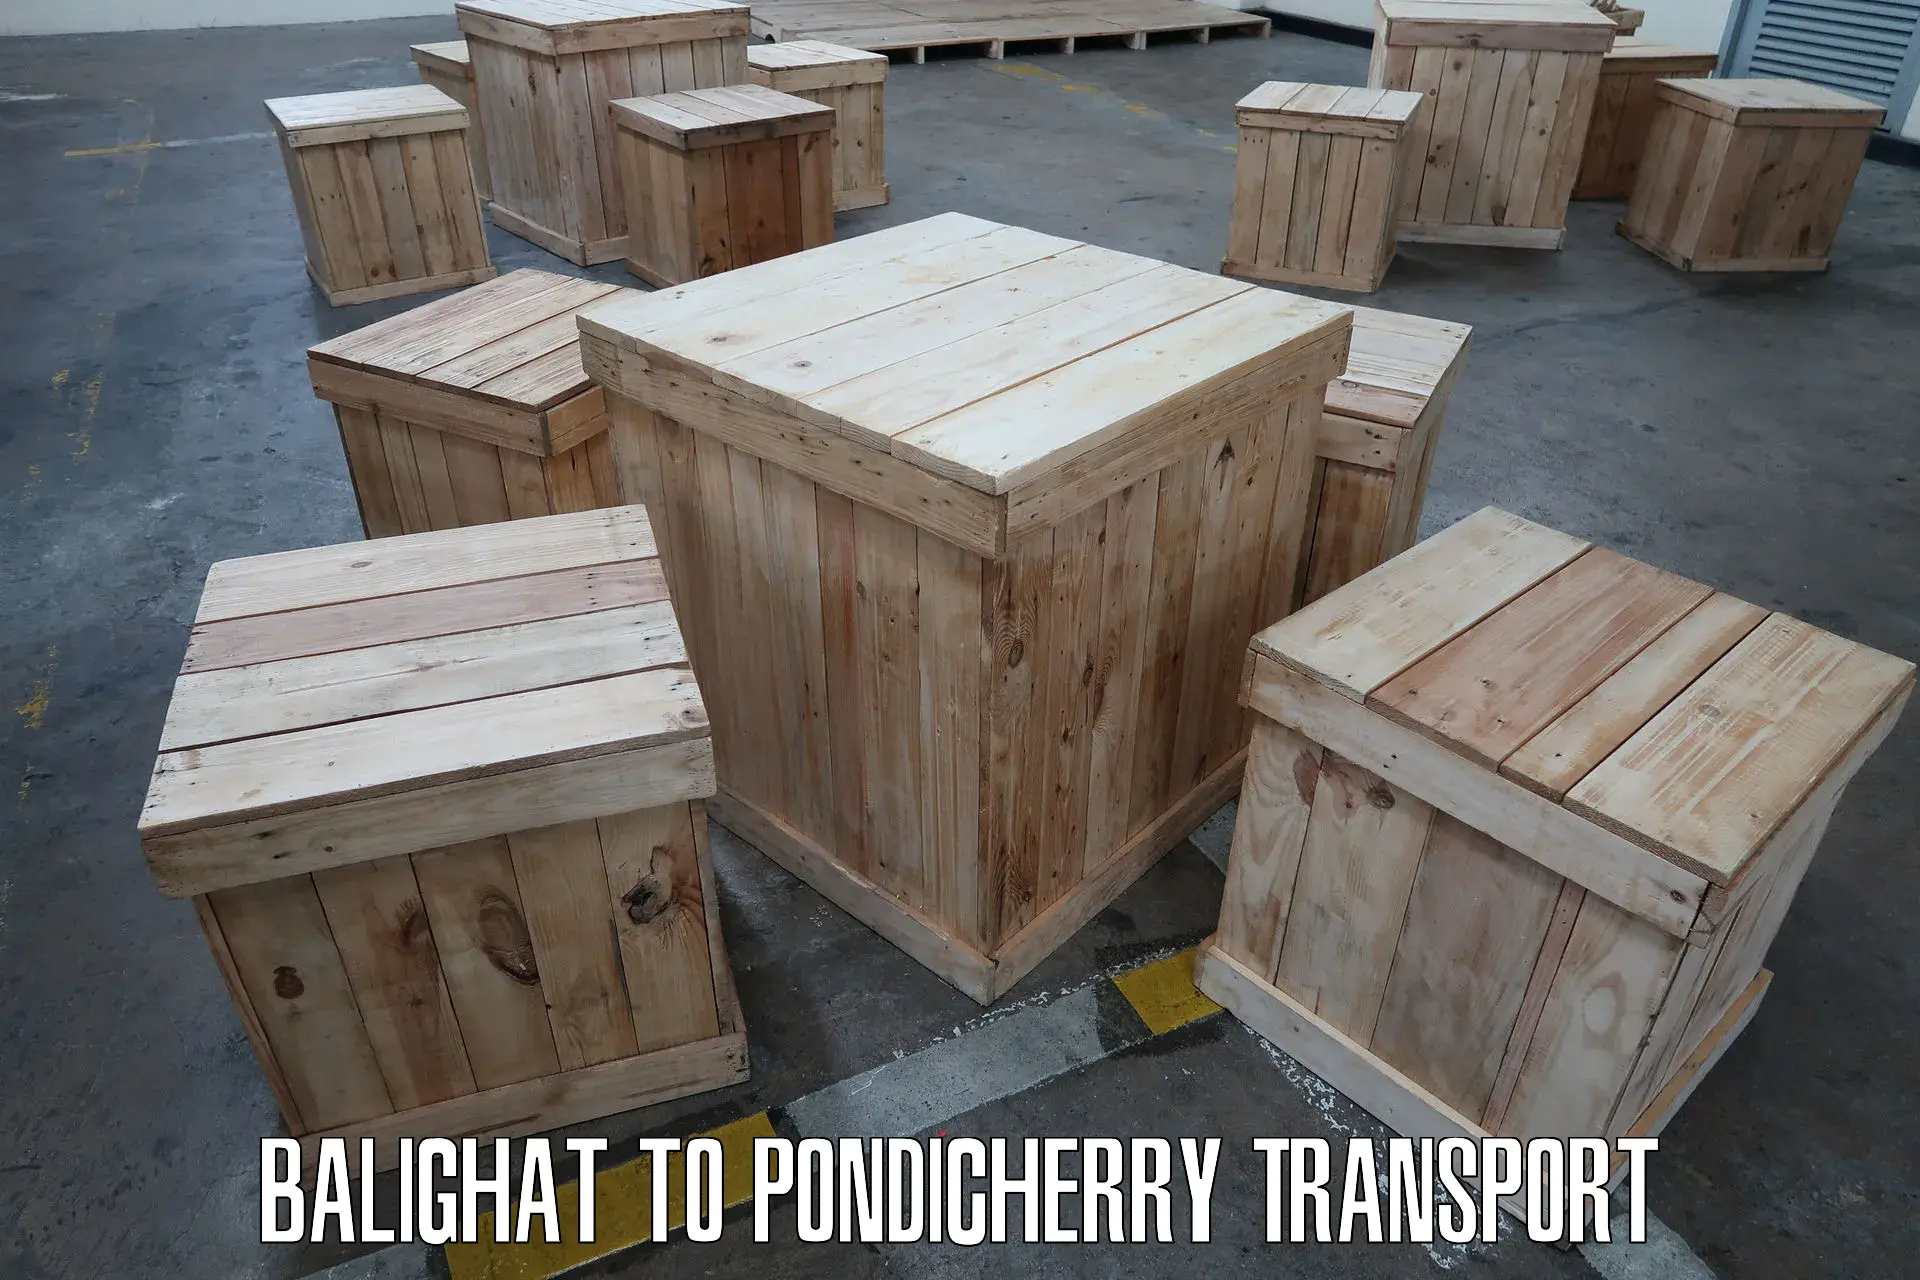 Container transport service Balighat to Pondicherry